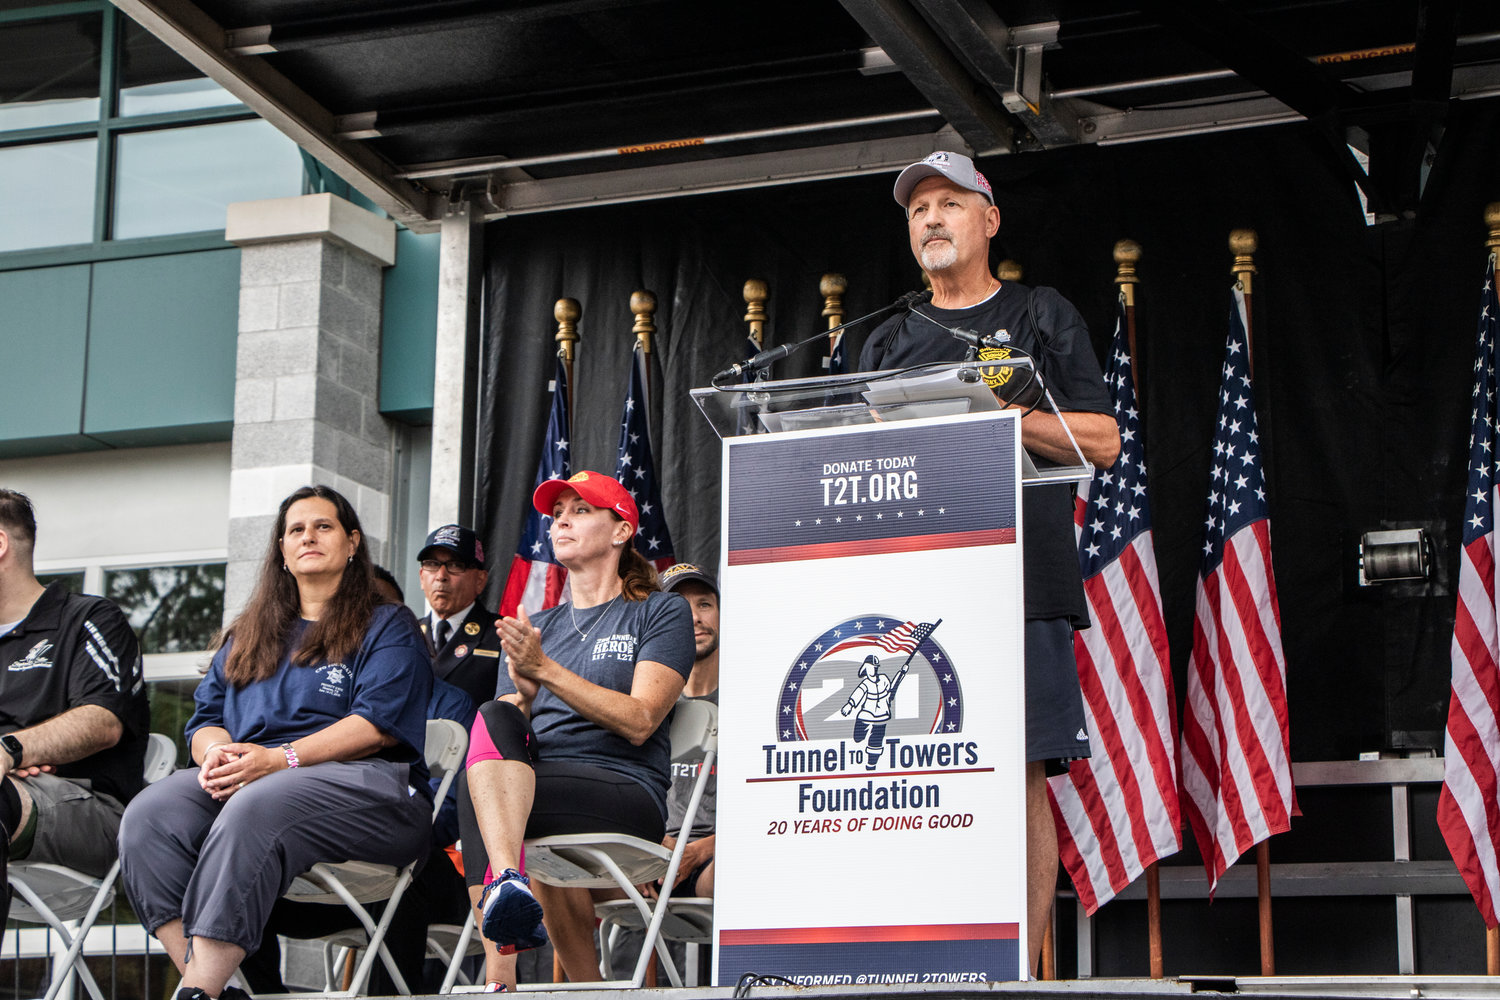 Frank Siller said it was important to him to keep his brother’s memory alive, as well as those of everyone who died on 9/11 and in the years following from diseases related to working at ground zero.